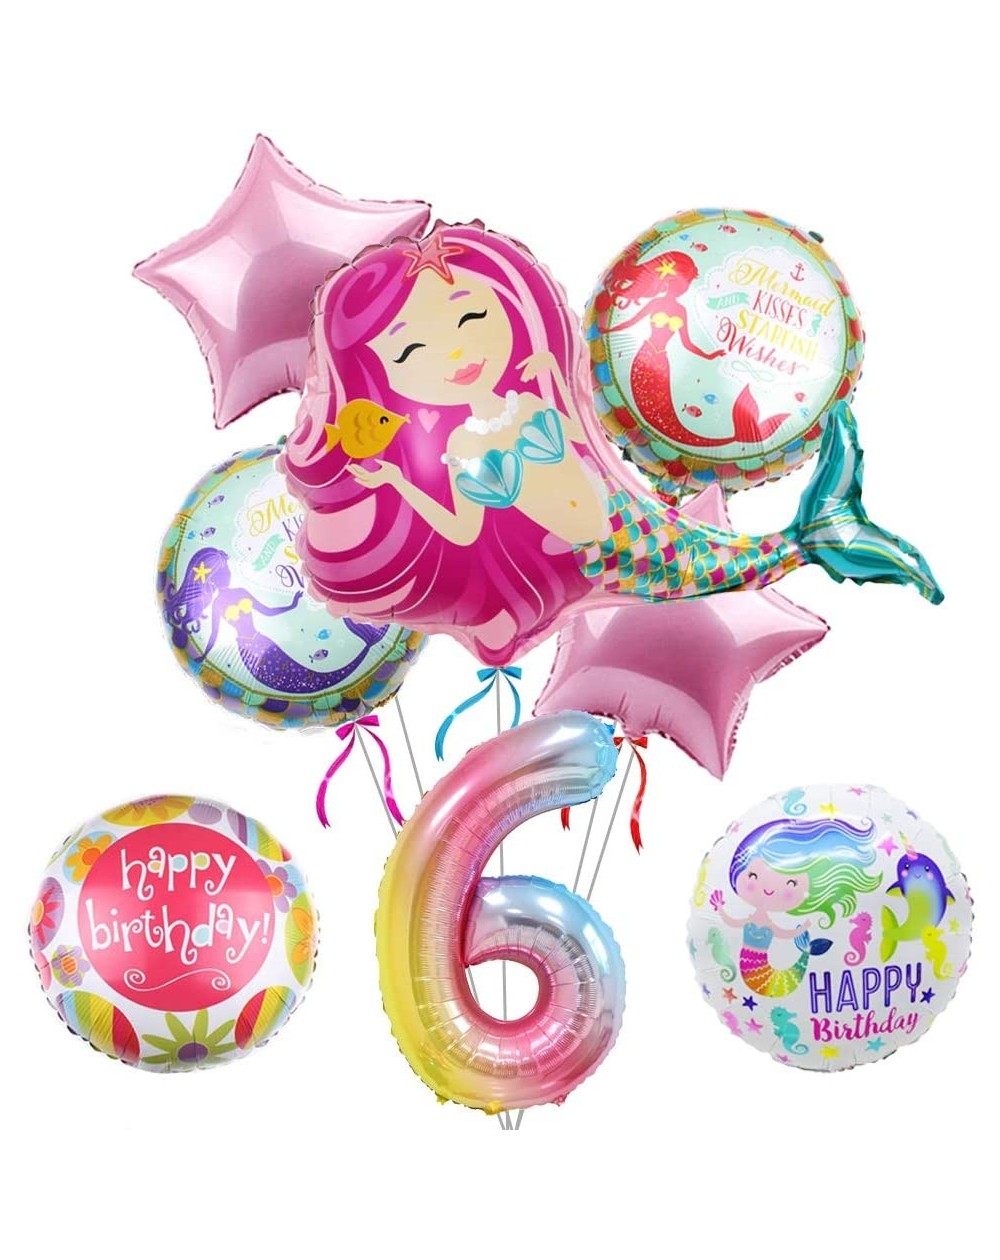 Balloons Mermaid Party Supplies- Pink Mermaid 6th Birthday Balloon Bouquet Decorations-Baby Shower- Home Office Decor- Birthd...